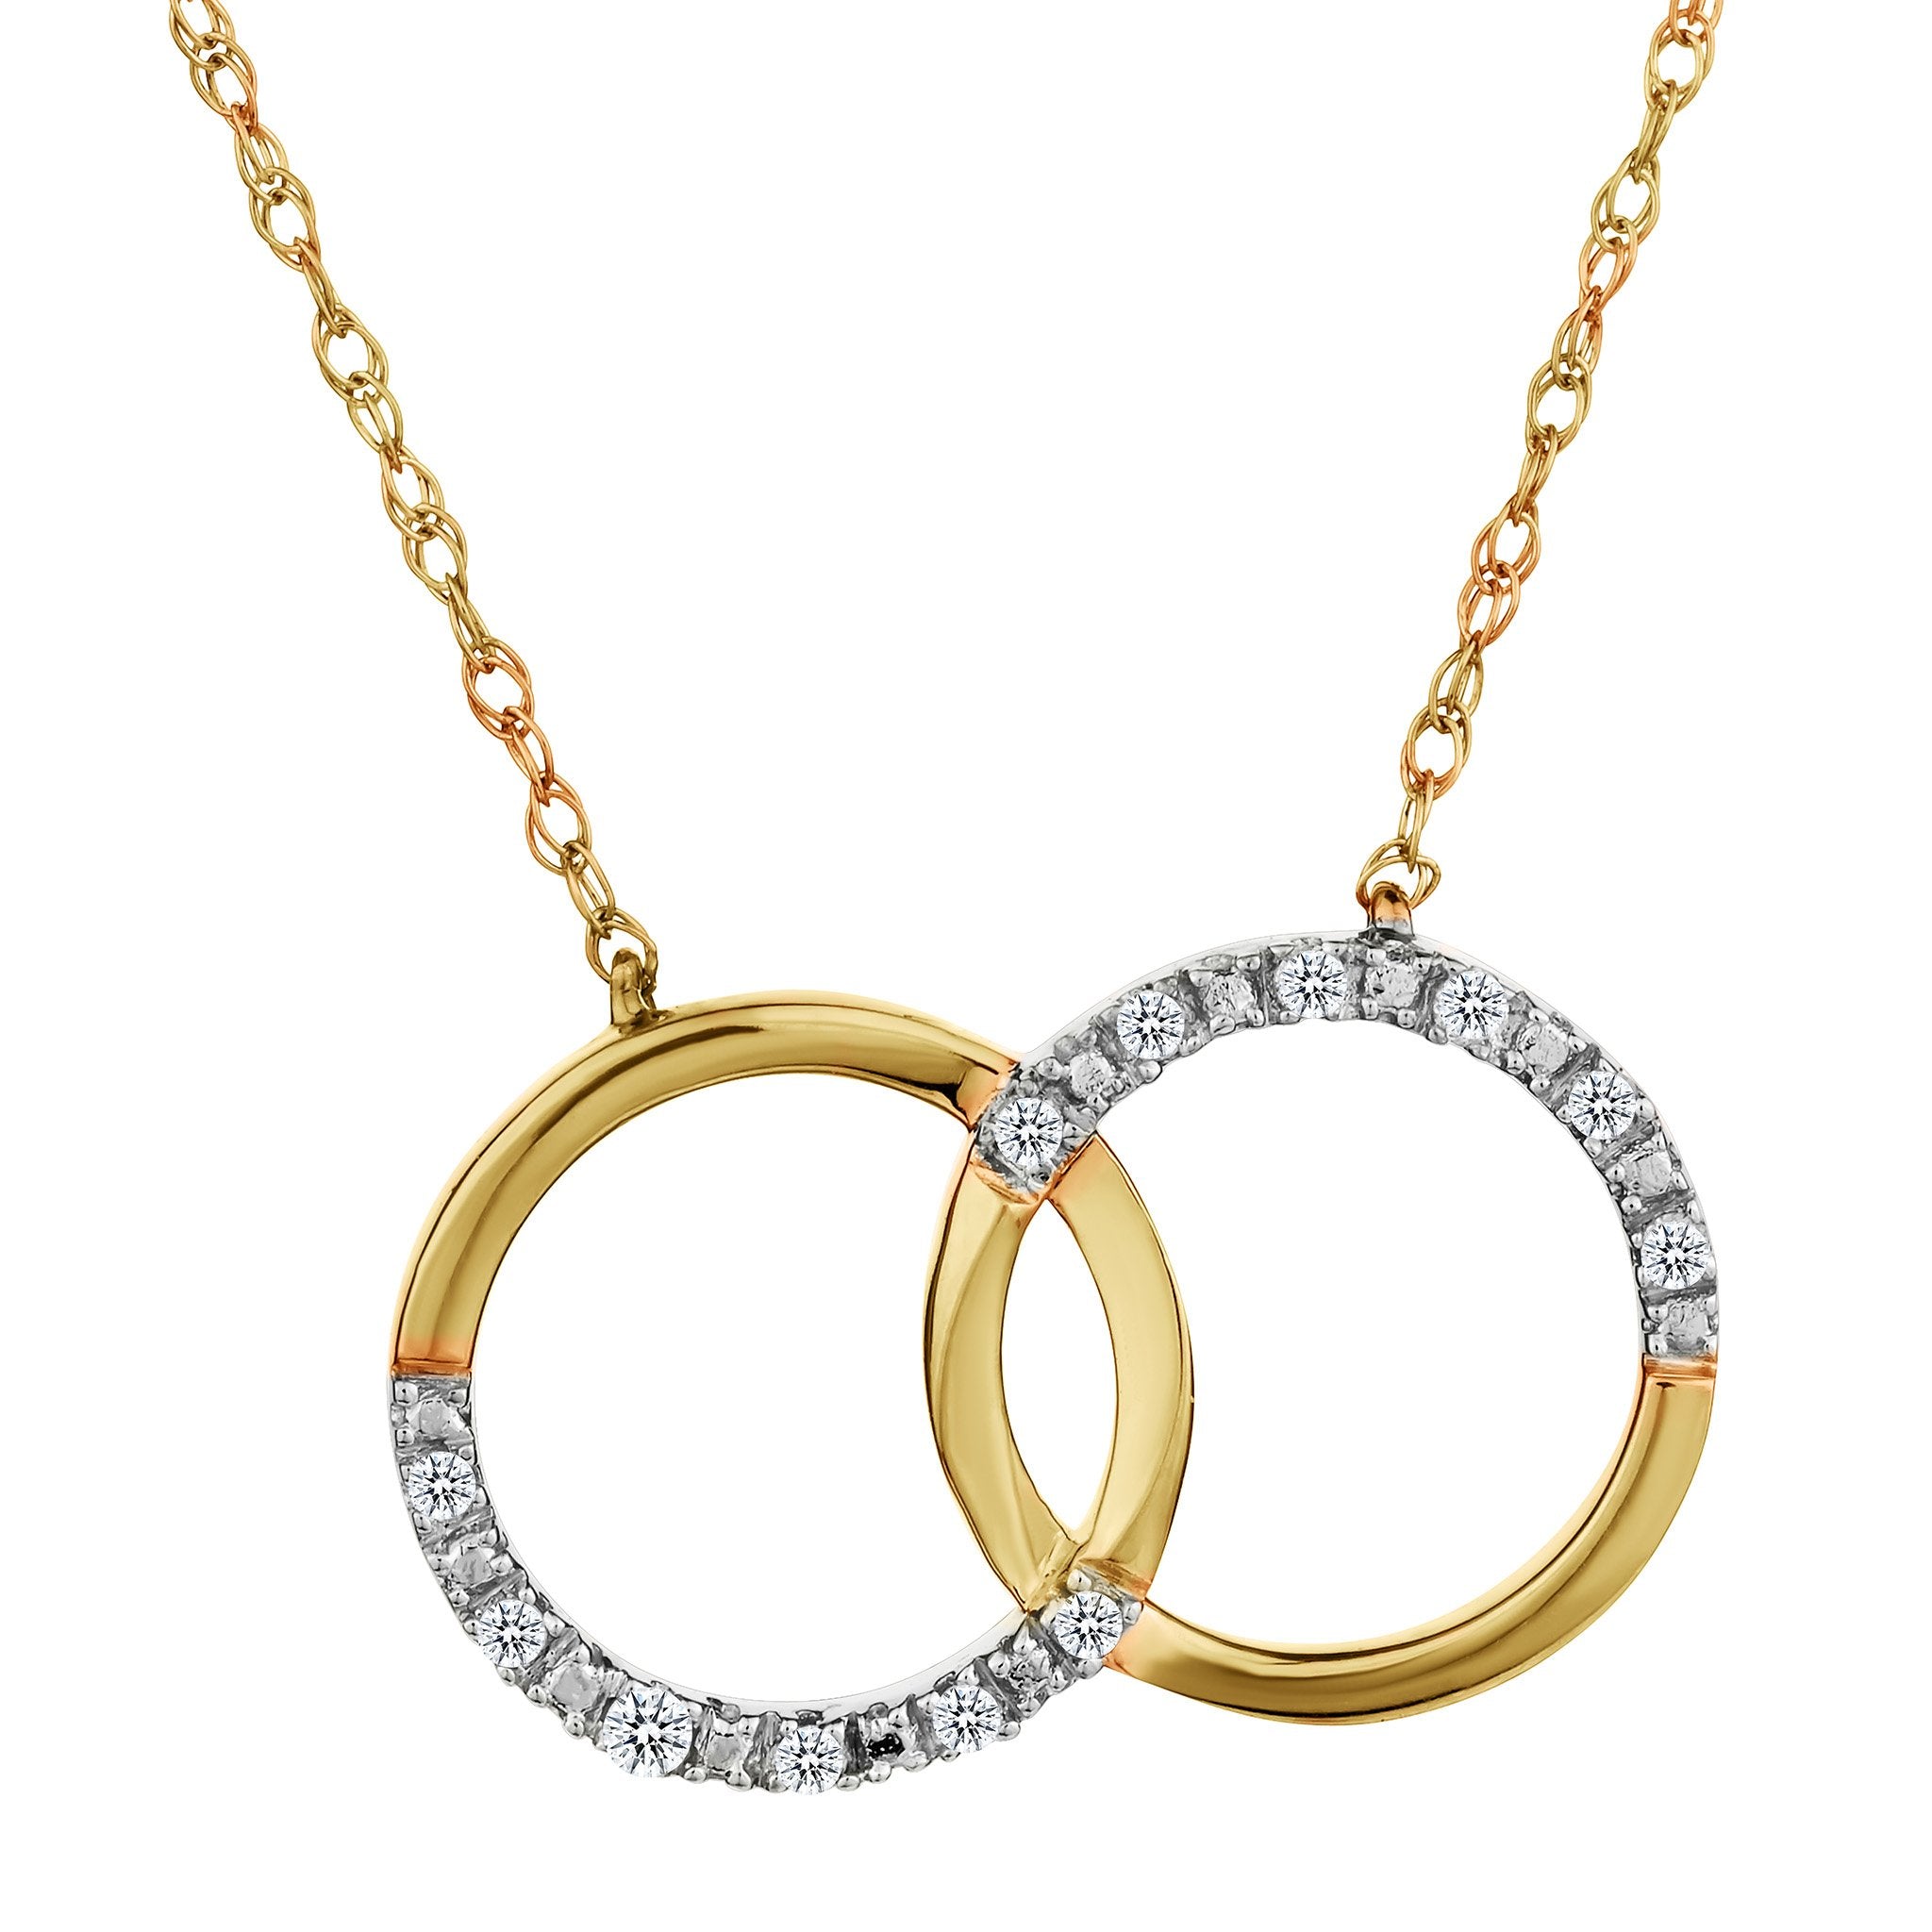 .05 CARAT DIAMOND "RINGS OF LOVE" PENDANT NECKLACE, 10kt YELLOW GOLD....................NOW